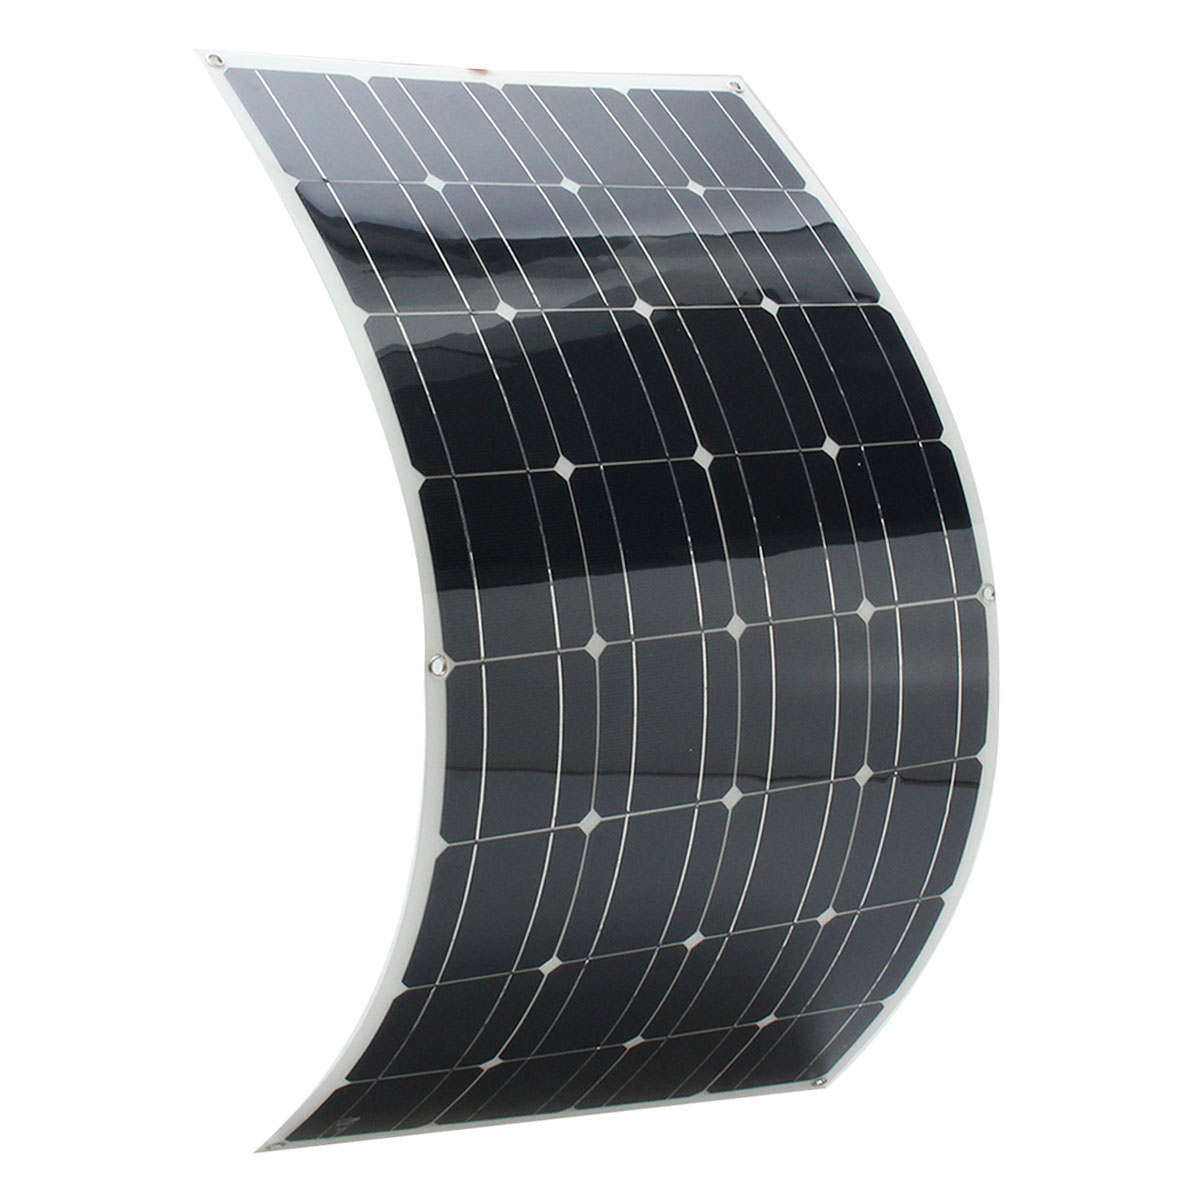 Elfeland® SP-38 18V 100W 1050x540x2.5mm Flexible Solar Panel With 1.5m Cable 12